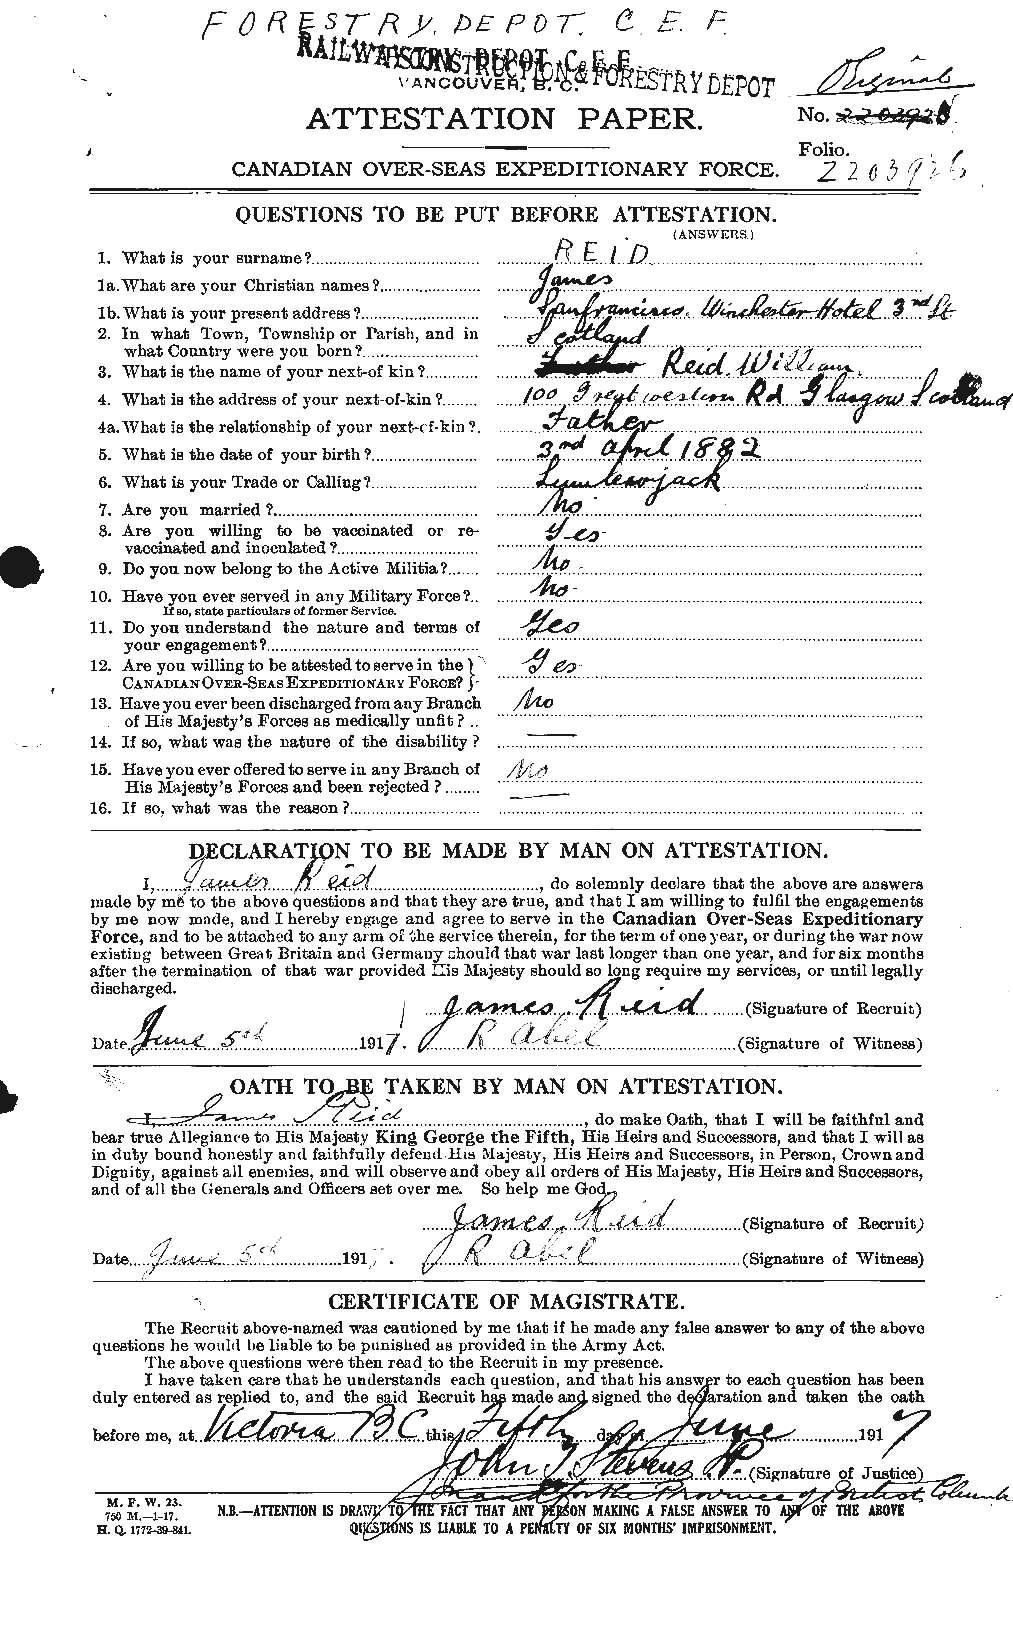 Personnel Records of the First World War - CEF 598650a